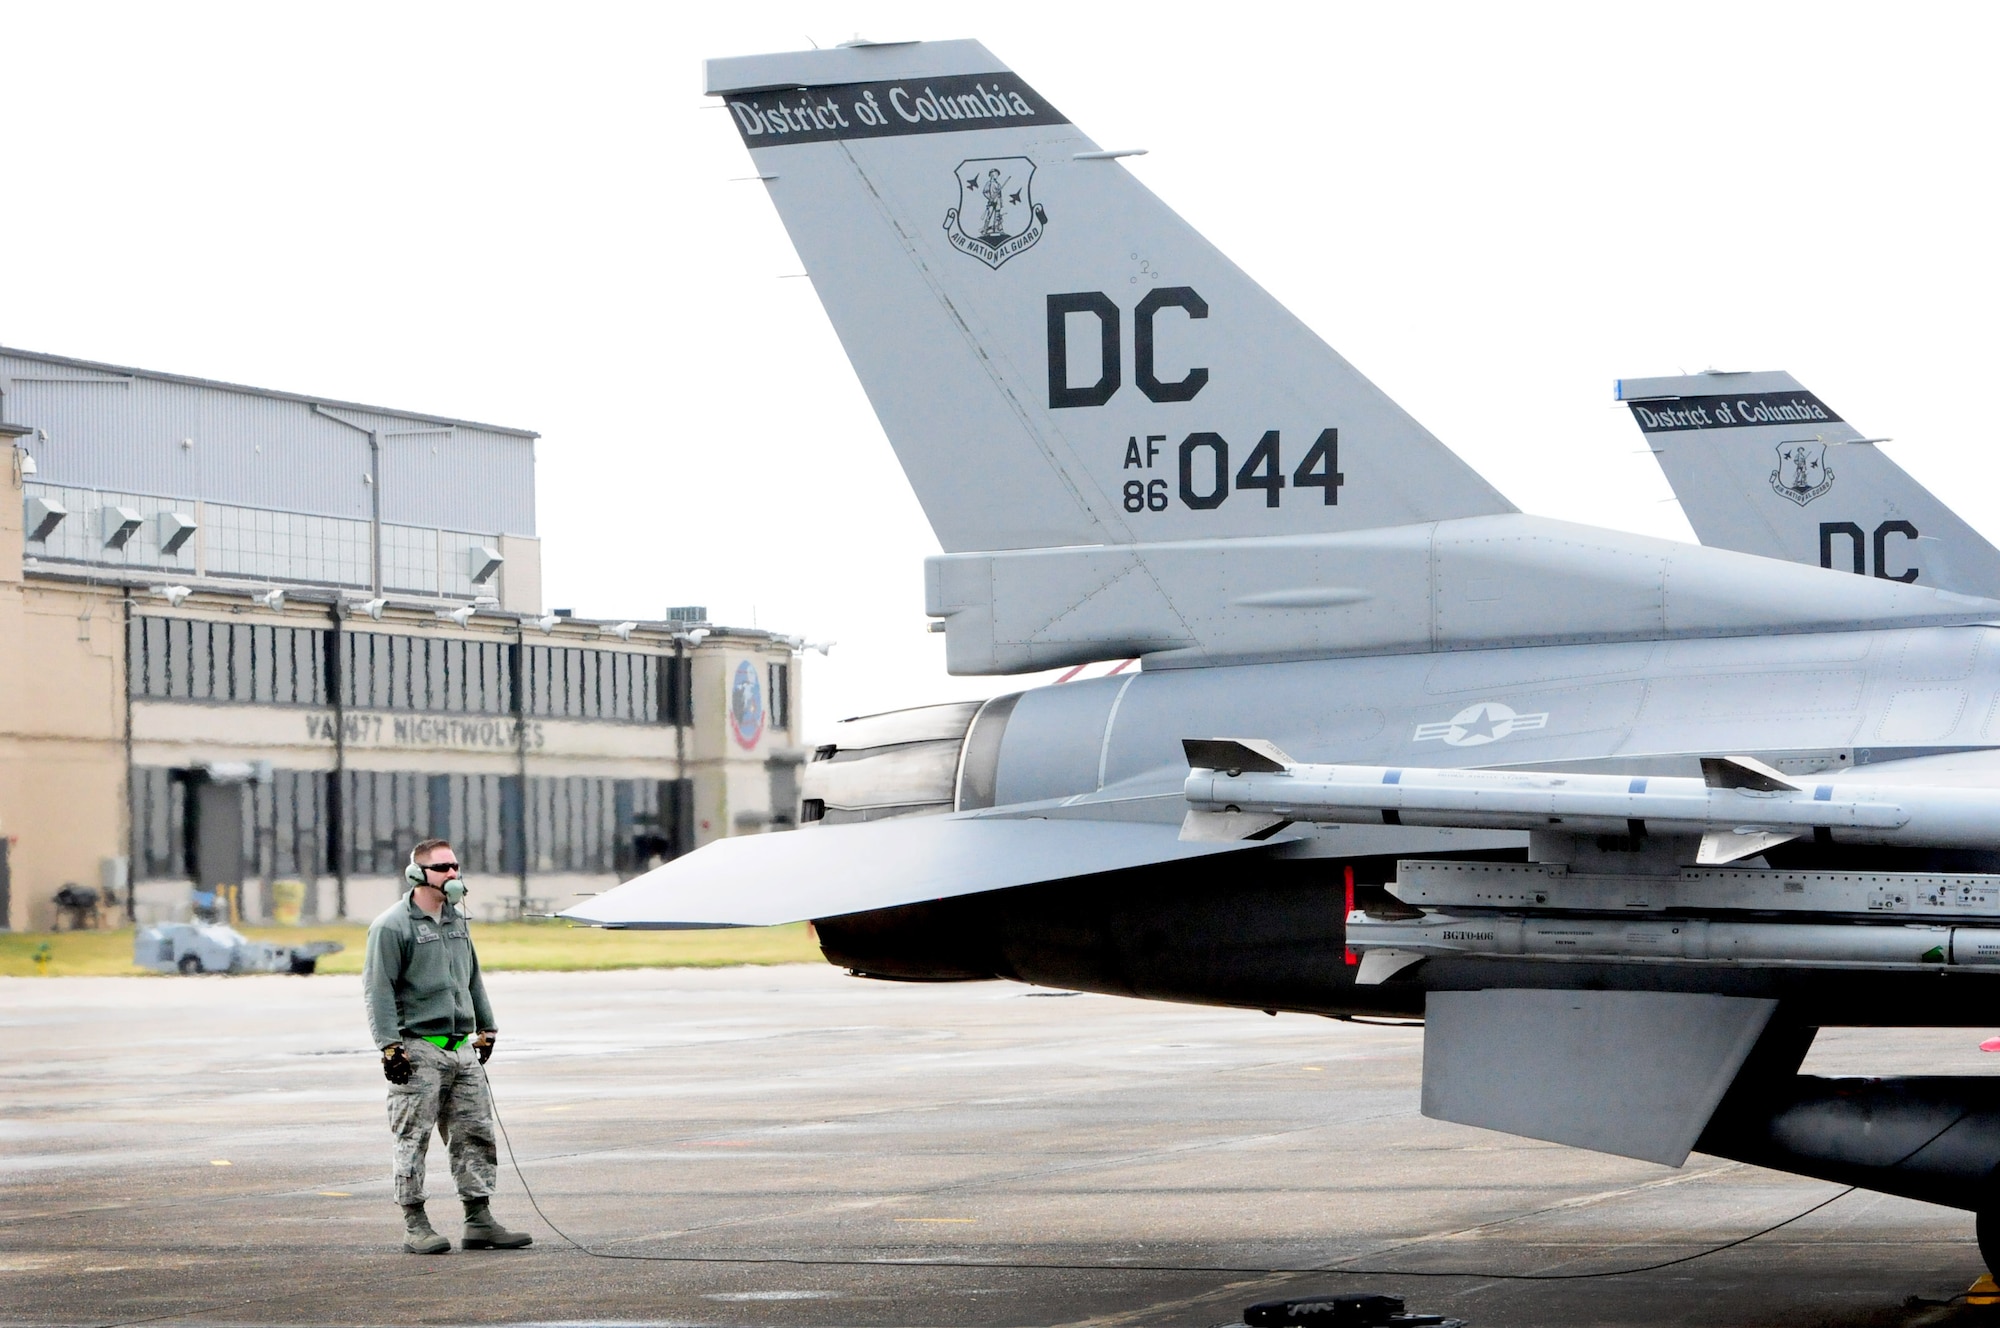 Staff Sgt. Samuel Baughman, crew chief, 113th Wing, Joint Base Andrews, Md., prepares an F-16 for a flying sortie at Naval Air Station Joint Reserve Base New Orleans, La., during Exercise Sentry Voodoo 2016. The D.C. Air National Guard Airmen are participating in the two-week flying exercise along with the 159th Fighter Wing, Louisiana Air National Guard, and the 459th Air Refueling Wing, Joint Base Andrews, Md. (Air National Guard photo by Master Sgt. Craig Clapper/Released)